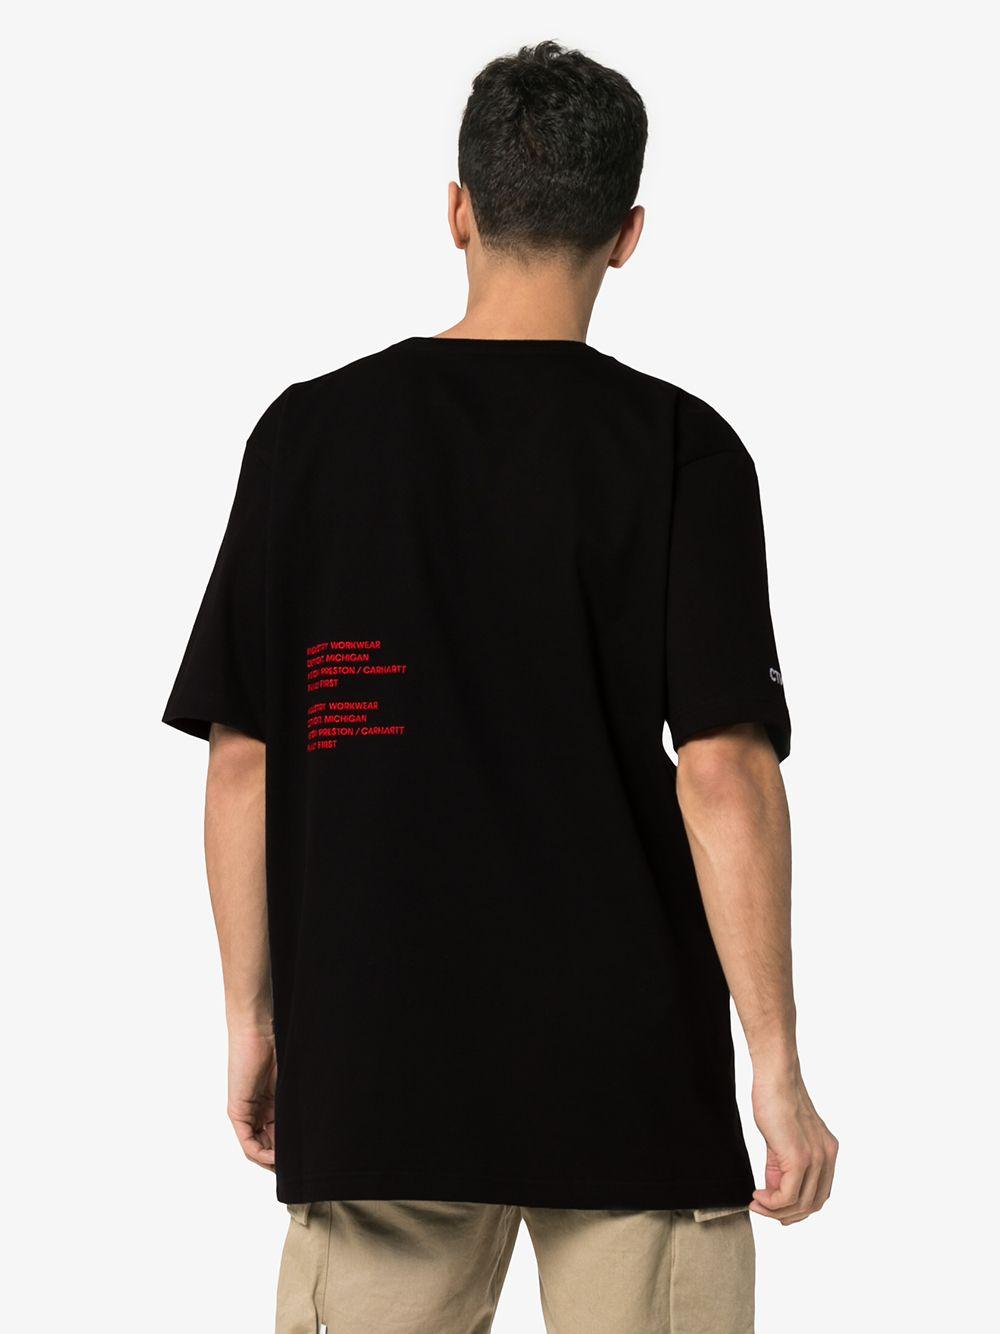 Heron Preston Embroidered Oversized Carhartt T-shirt in Black for 